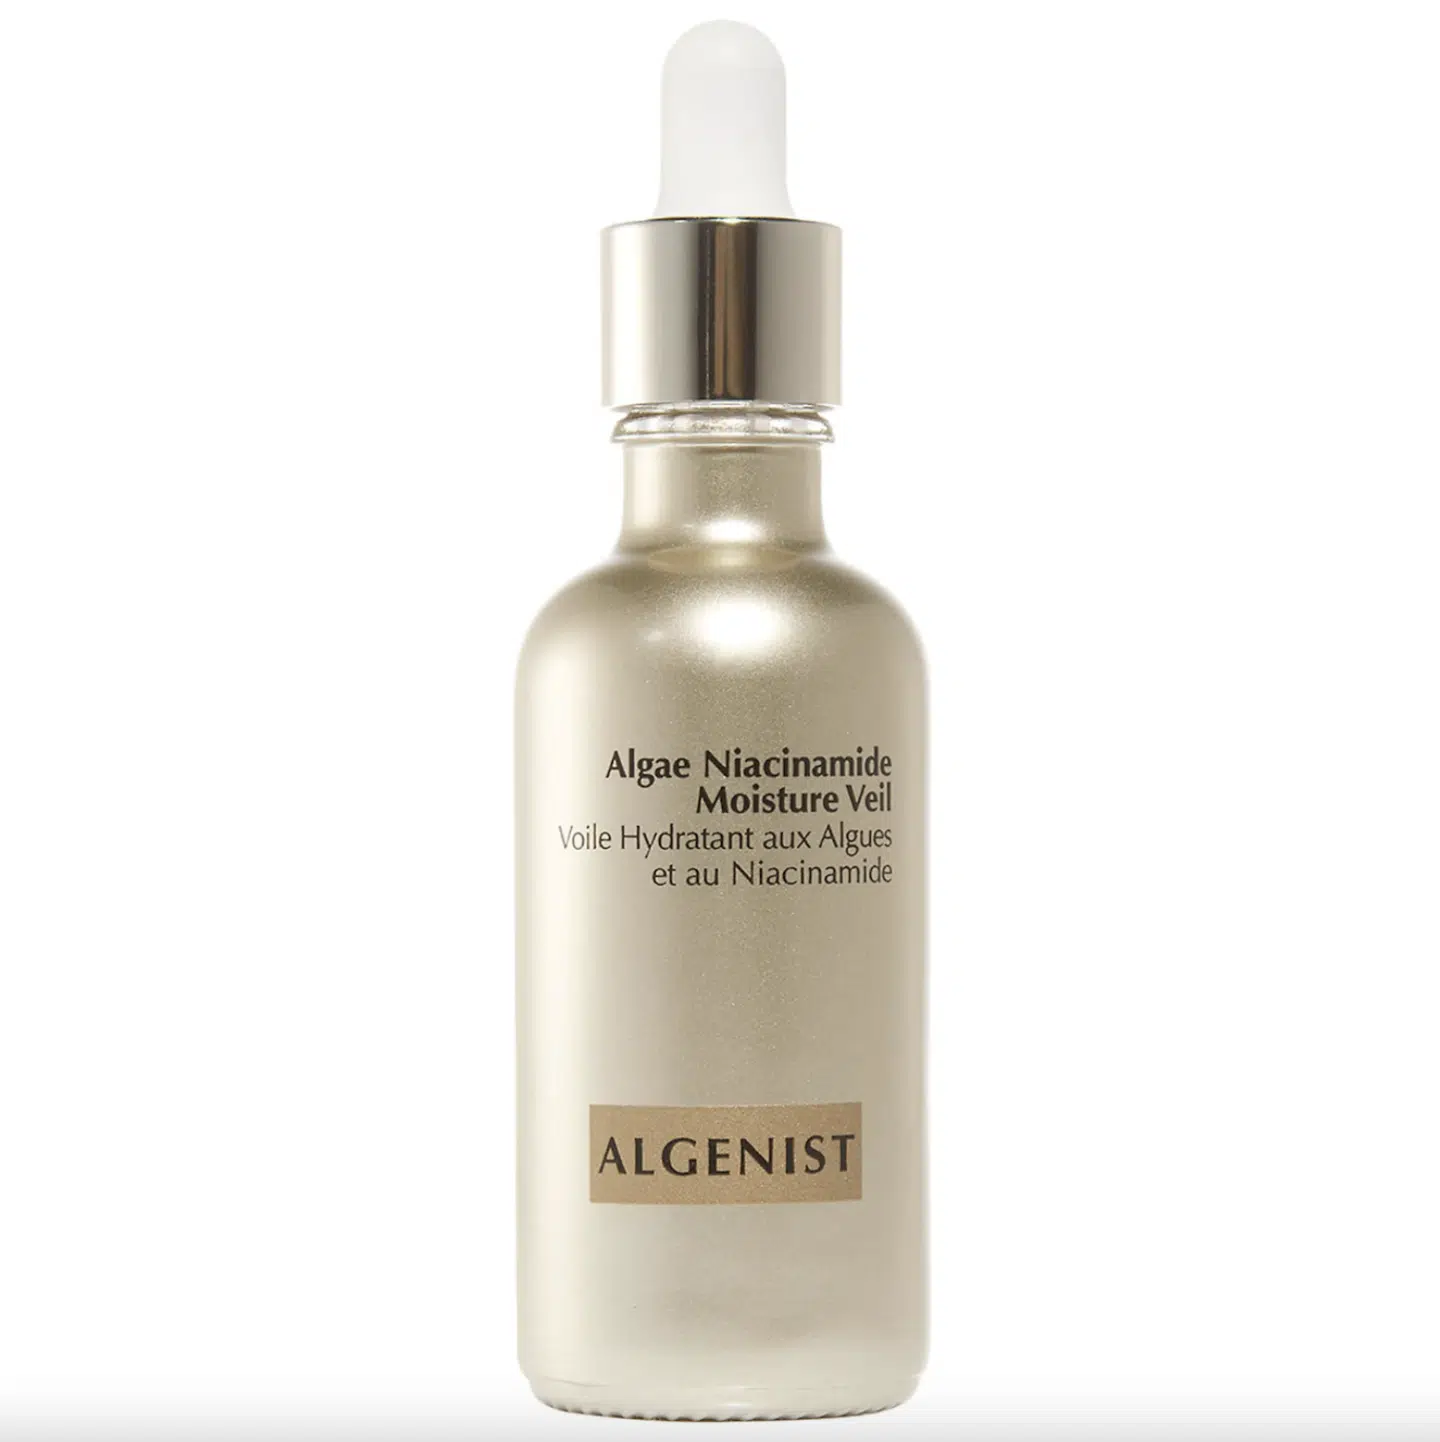 Niacinamide and retinol products, by beauty blogger What The Fab